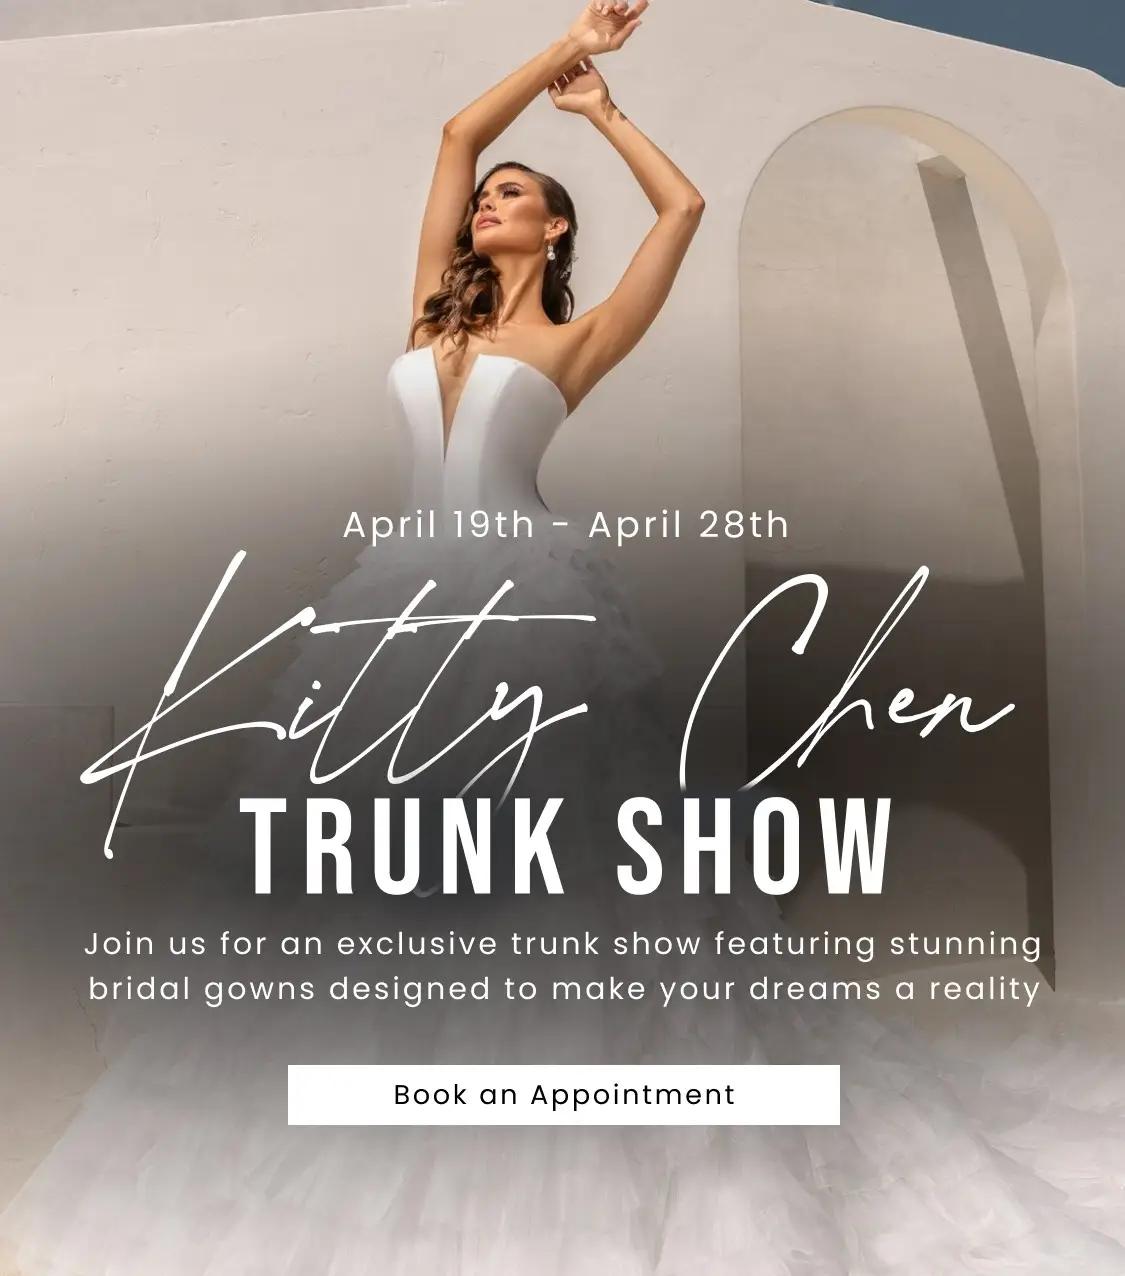 Kitty Chen Trunk Show mobile banner